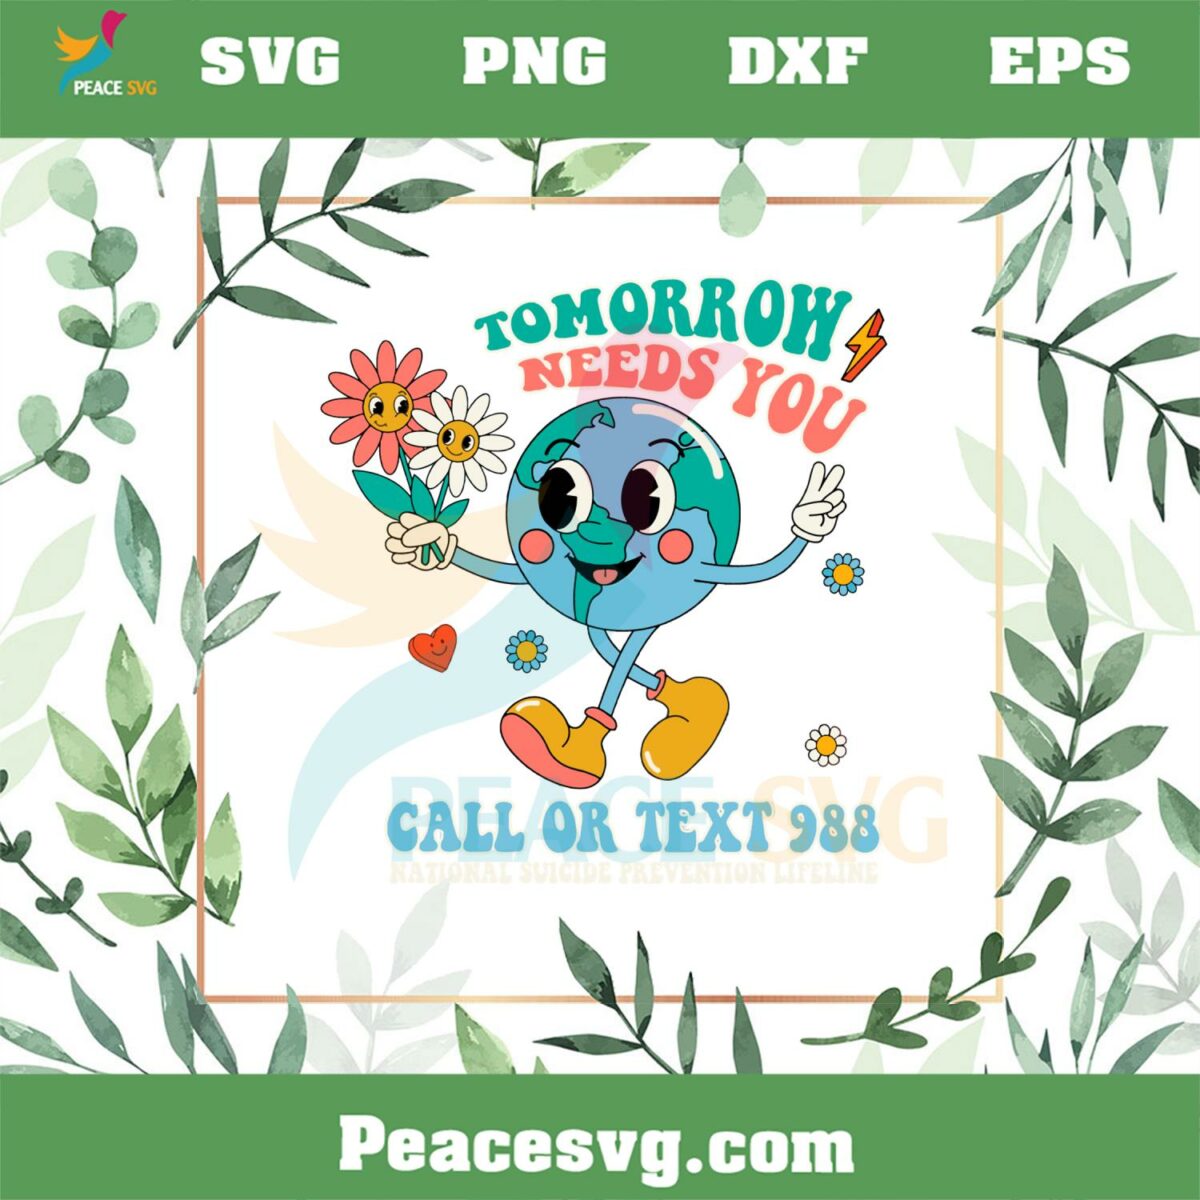 Tomorrow Needs You Groovy Mental Health SVG Cutting Files